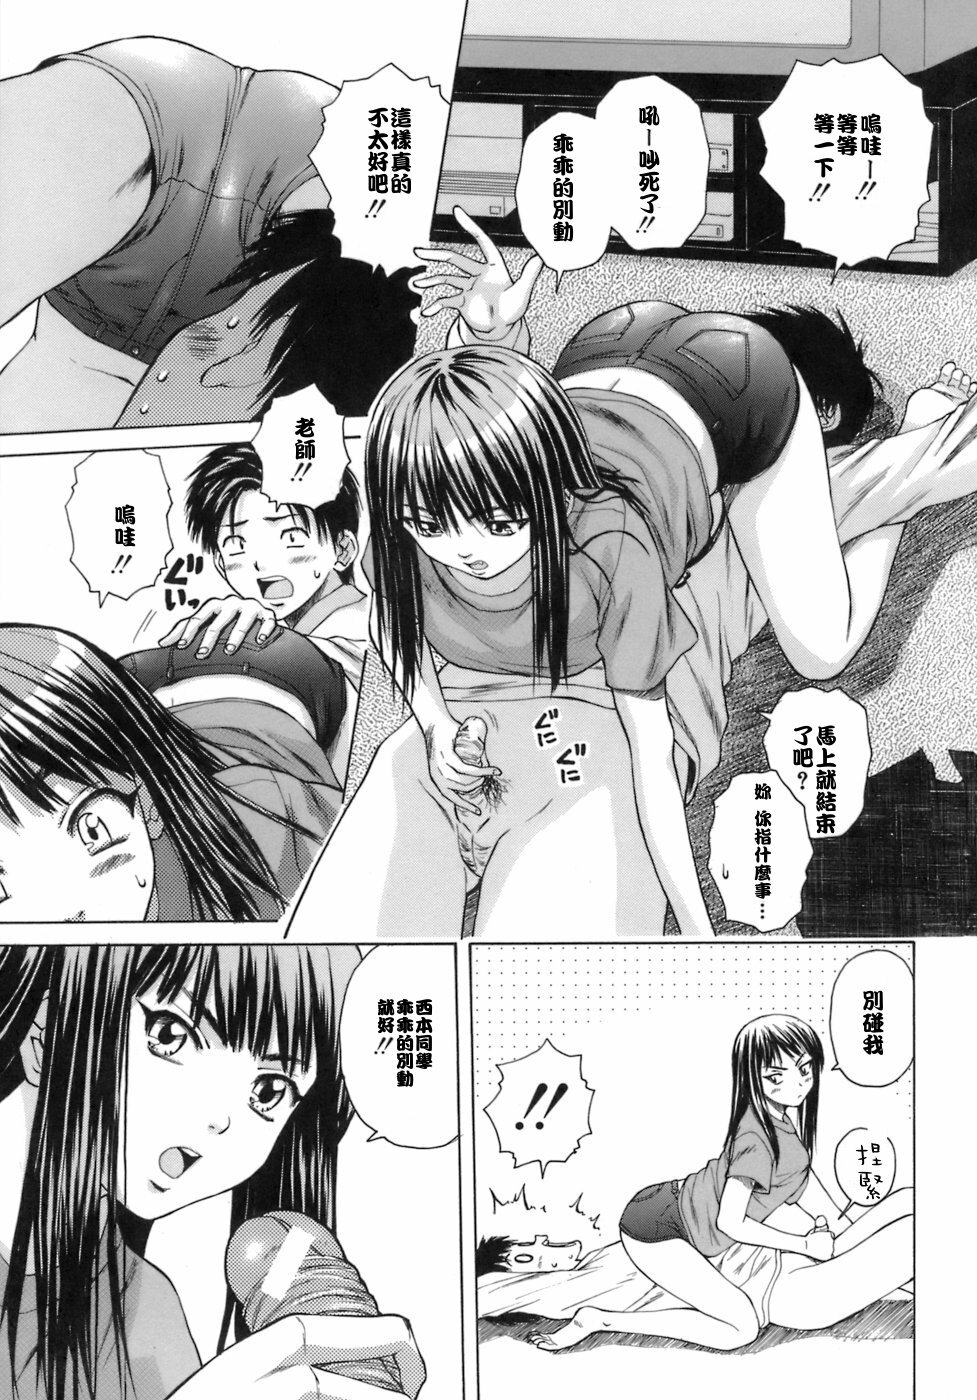 [Fuuga] Kyoushi to Seito to - Teacher and Student [Chinese] [悠月工房] page 24 full